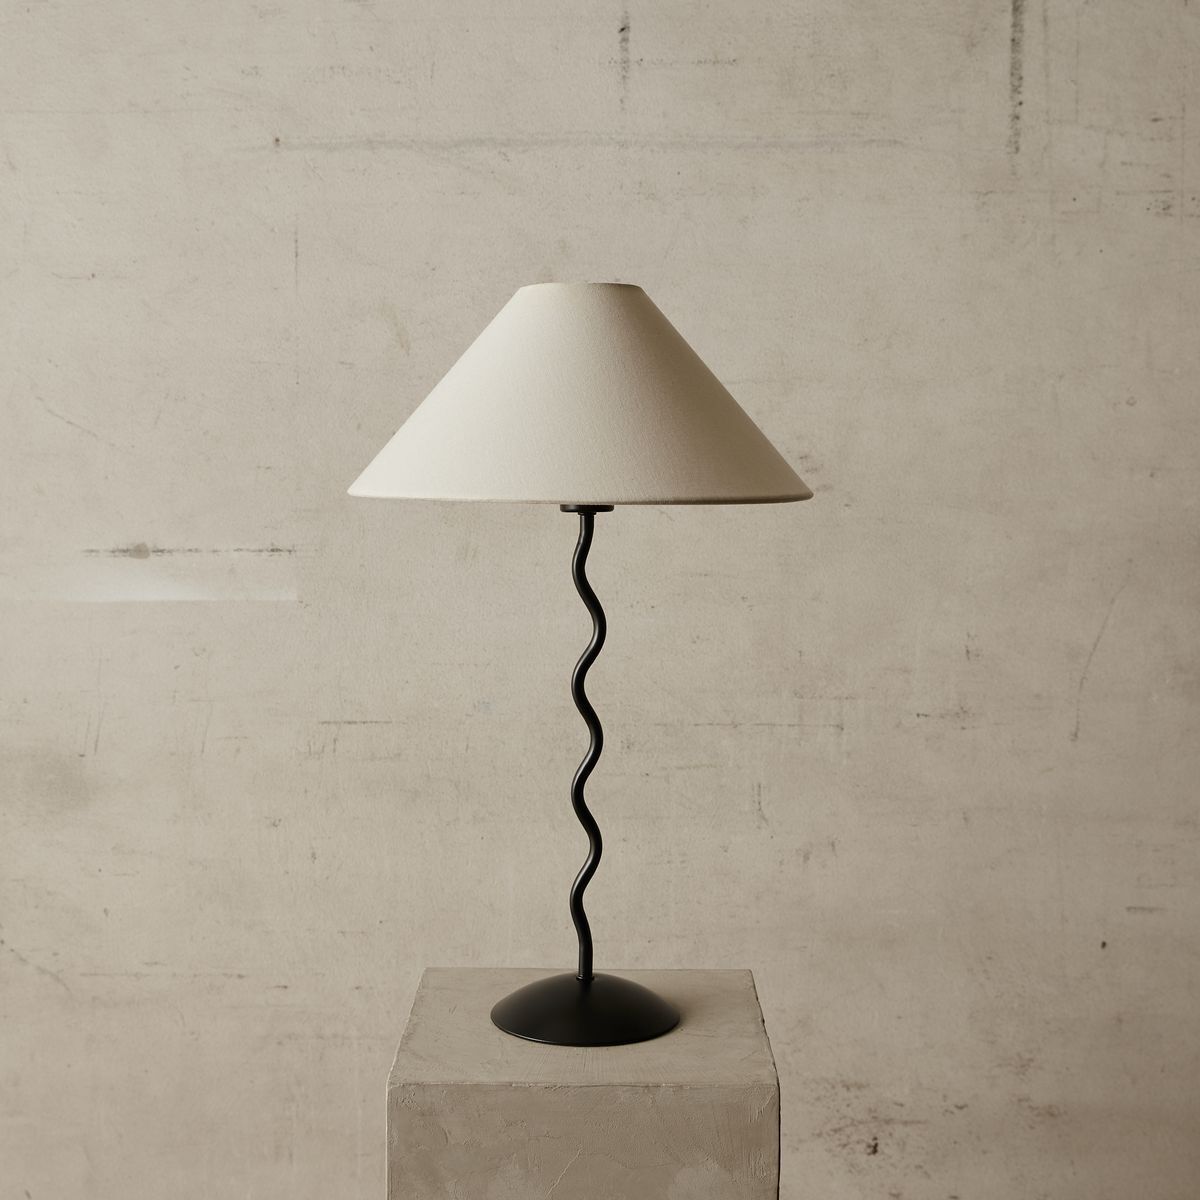 Percy Metal Black Table Lamp I McMullin & co. Floor & Table Lighting Collection 